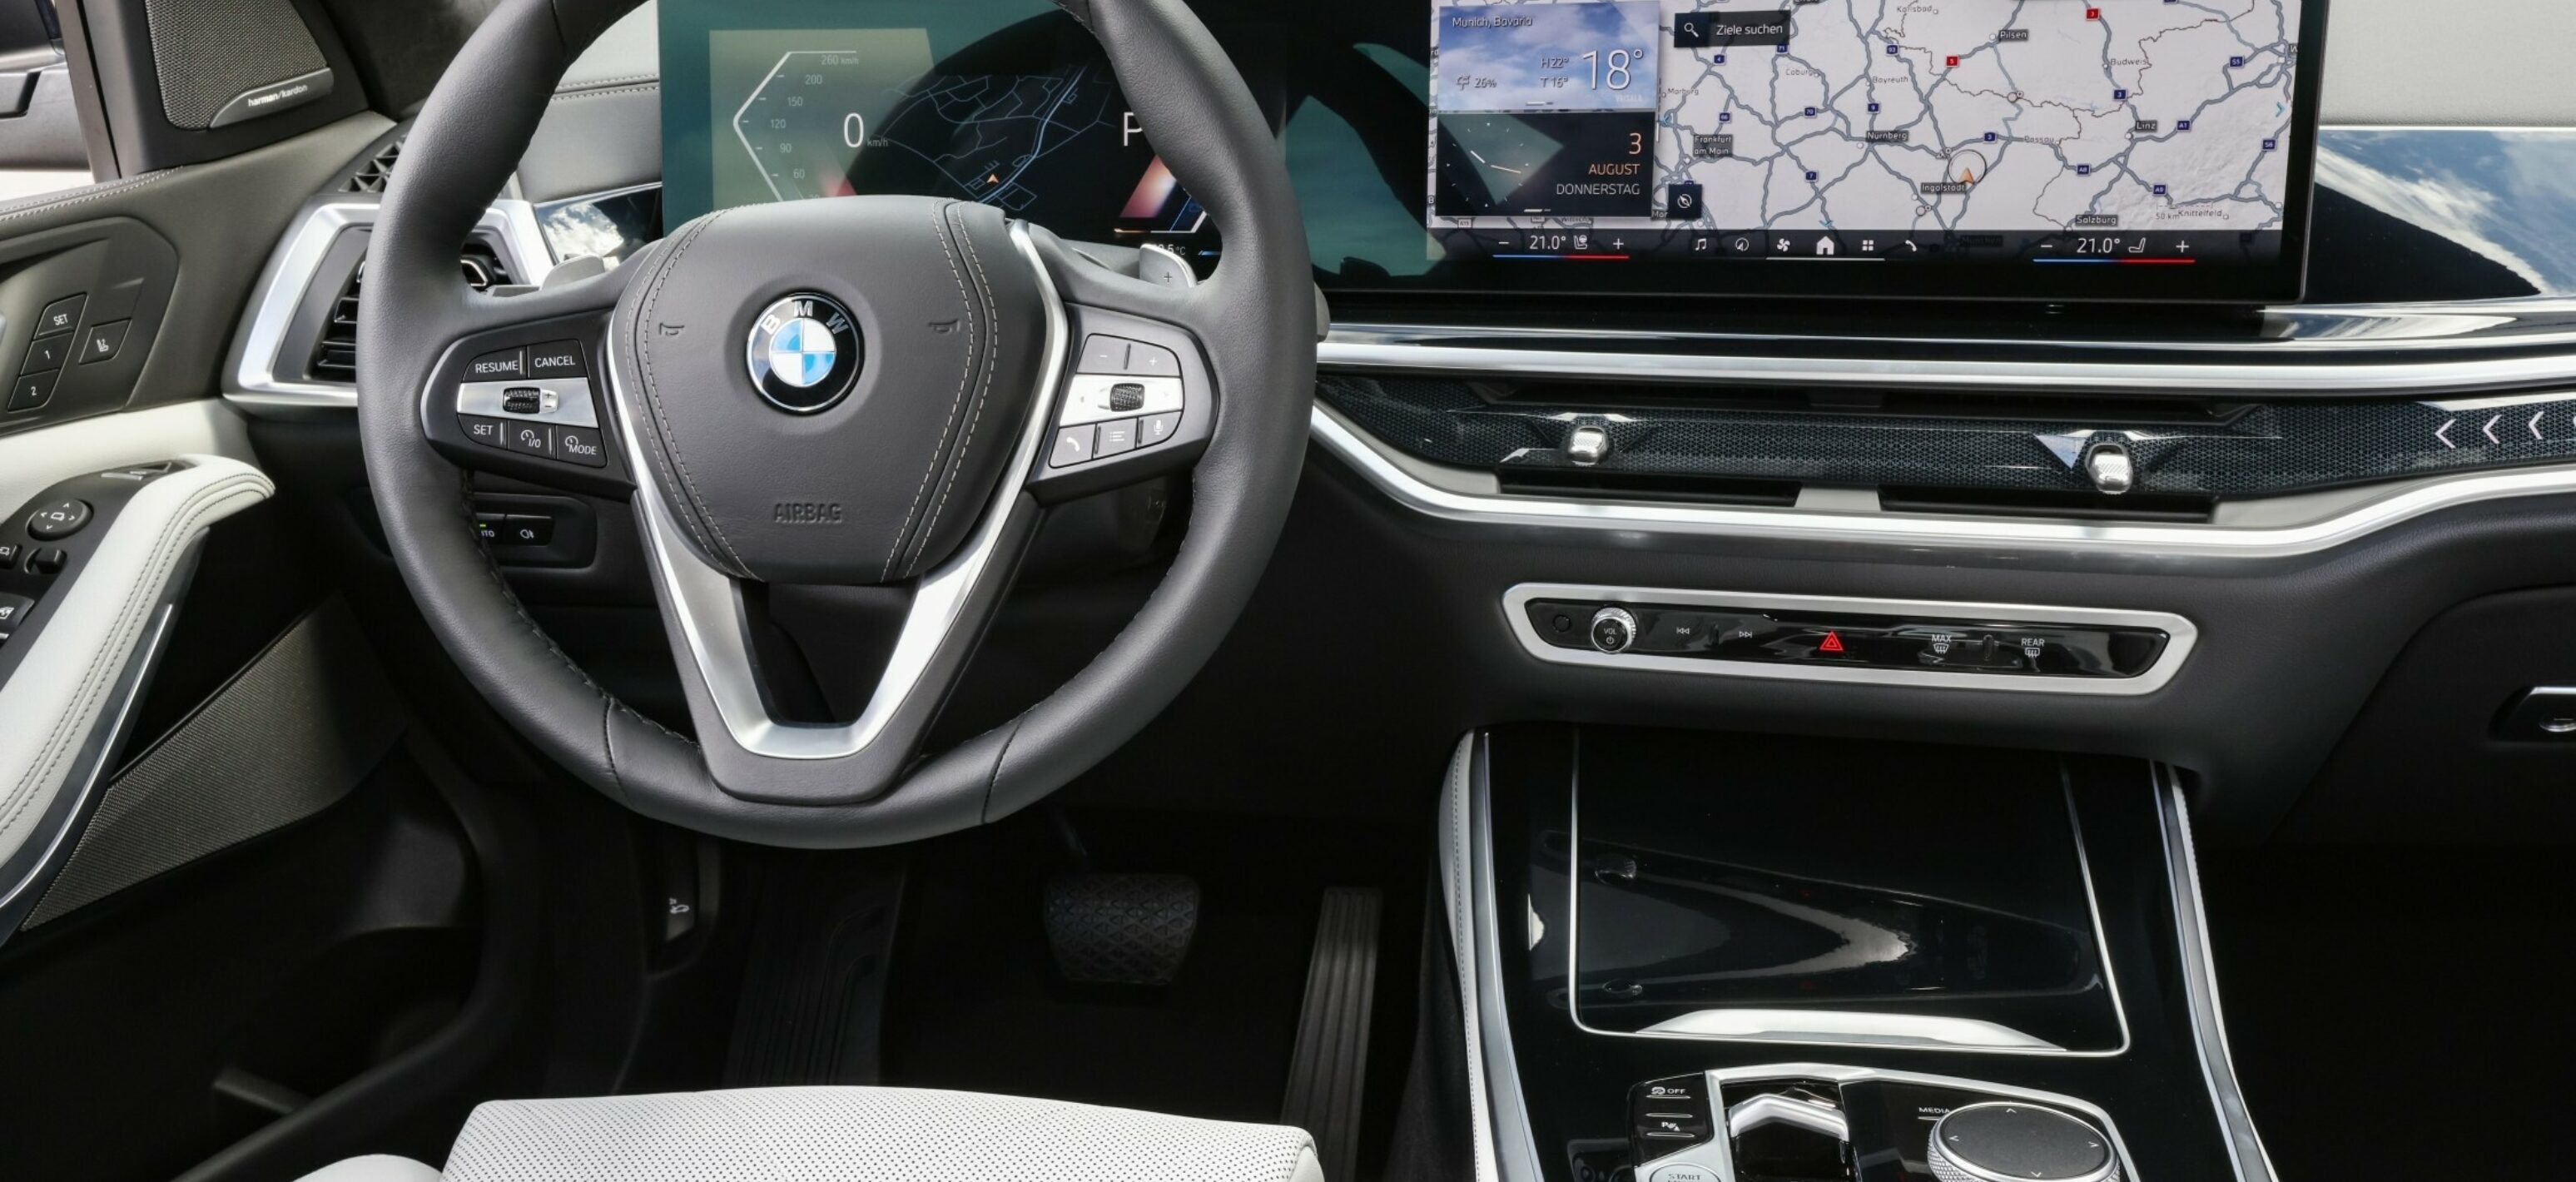 https://autofilter.sk/assets/images/x5/gallery/P90518118_lowRes_the-new-bmw-x5-08-23.jpg - obrazok